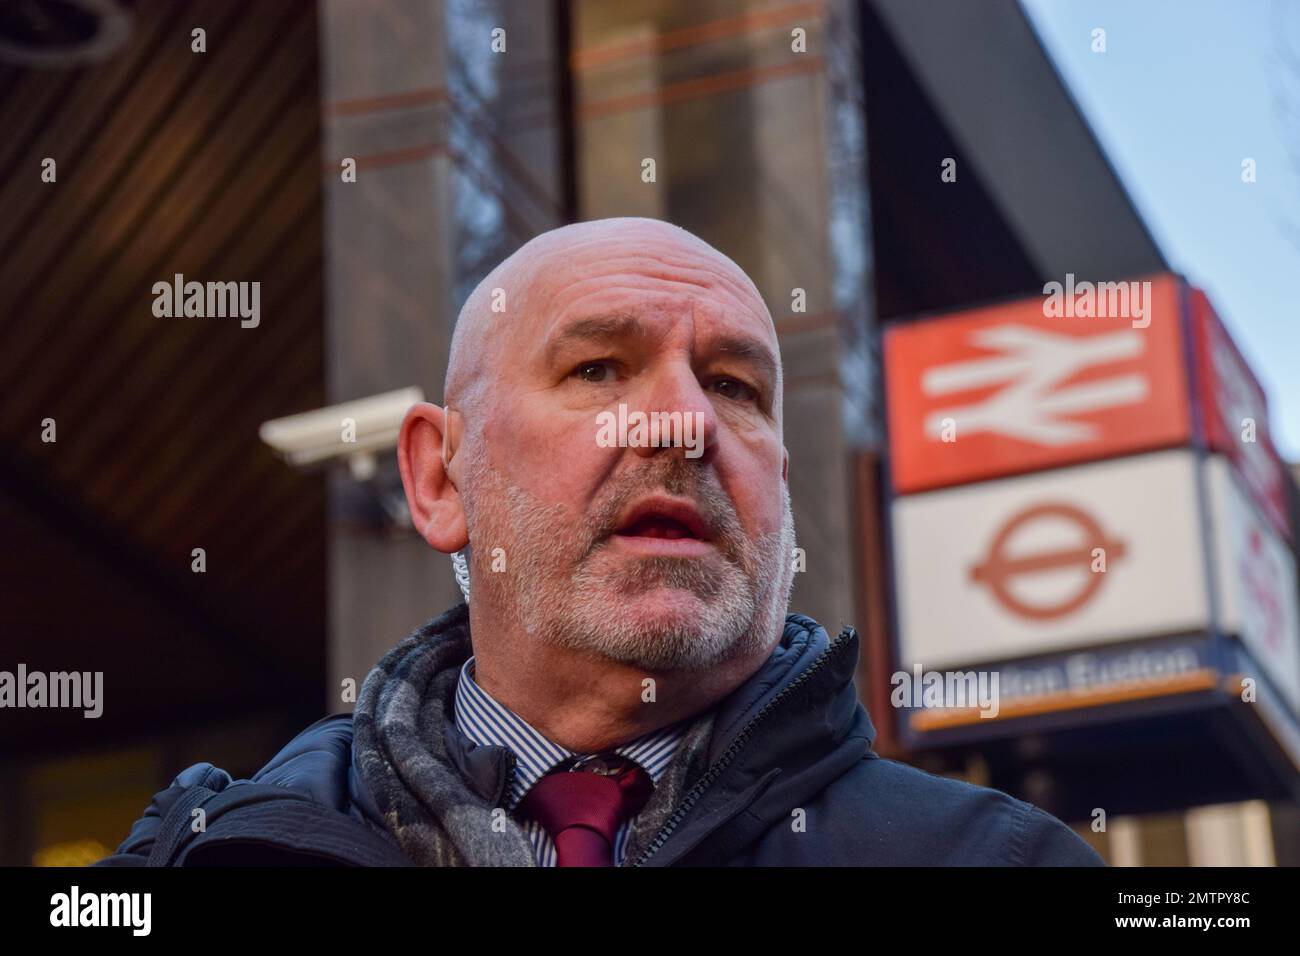 London, UK. 1st February 2023. ASLEF general secretary Mick Whelan speaks to the media at the picket outside Euston Station as train drivers go on strike. The day has seen around half a million people staging walkouts around the UK, including teachers, university staff, public service workers and train drivers. Credit: Vuk Valcic/Alamy Live News. Stock Photo